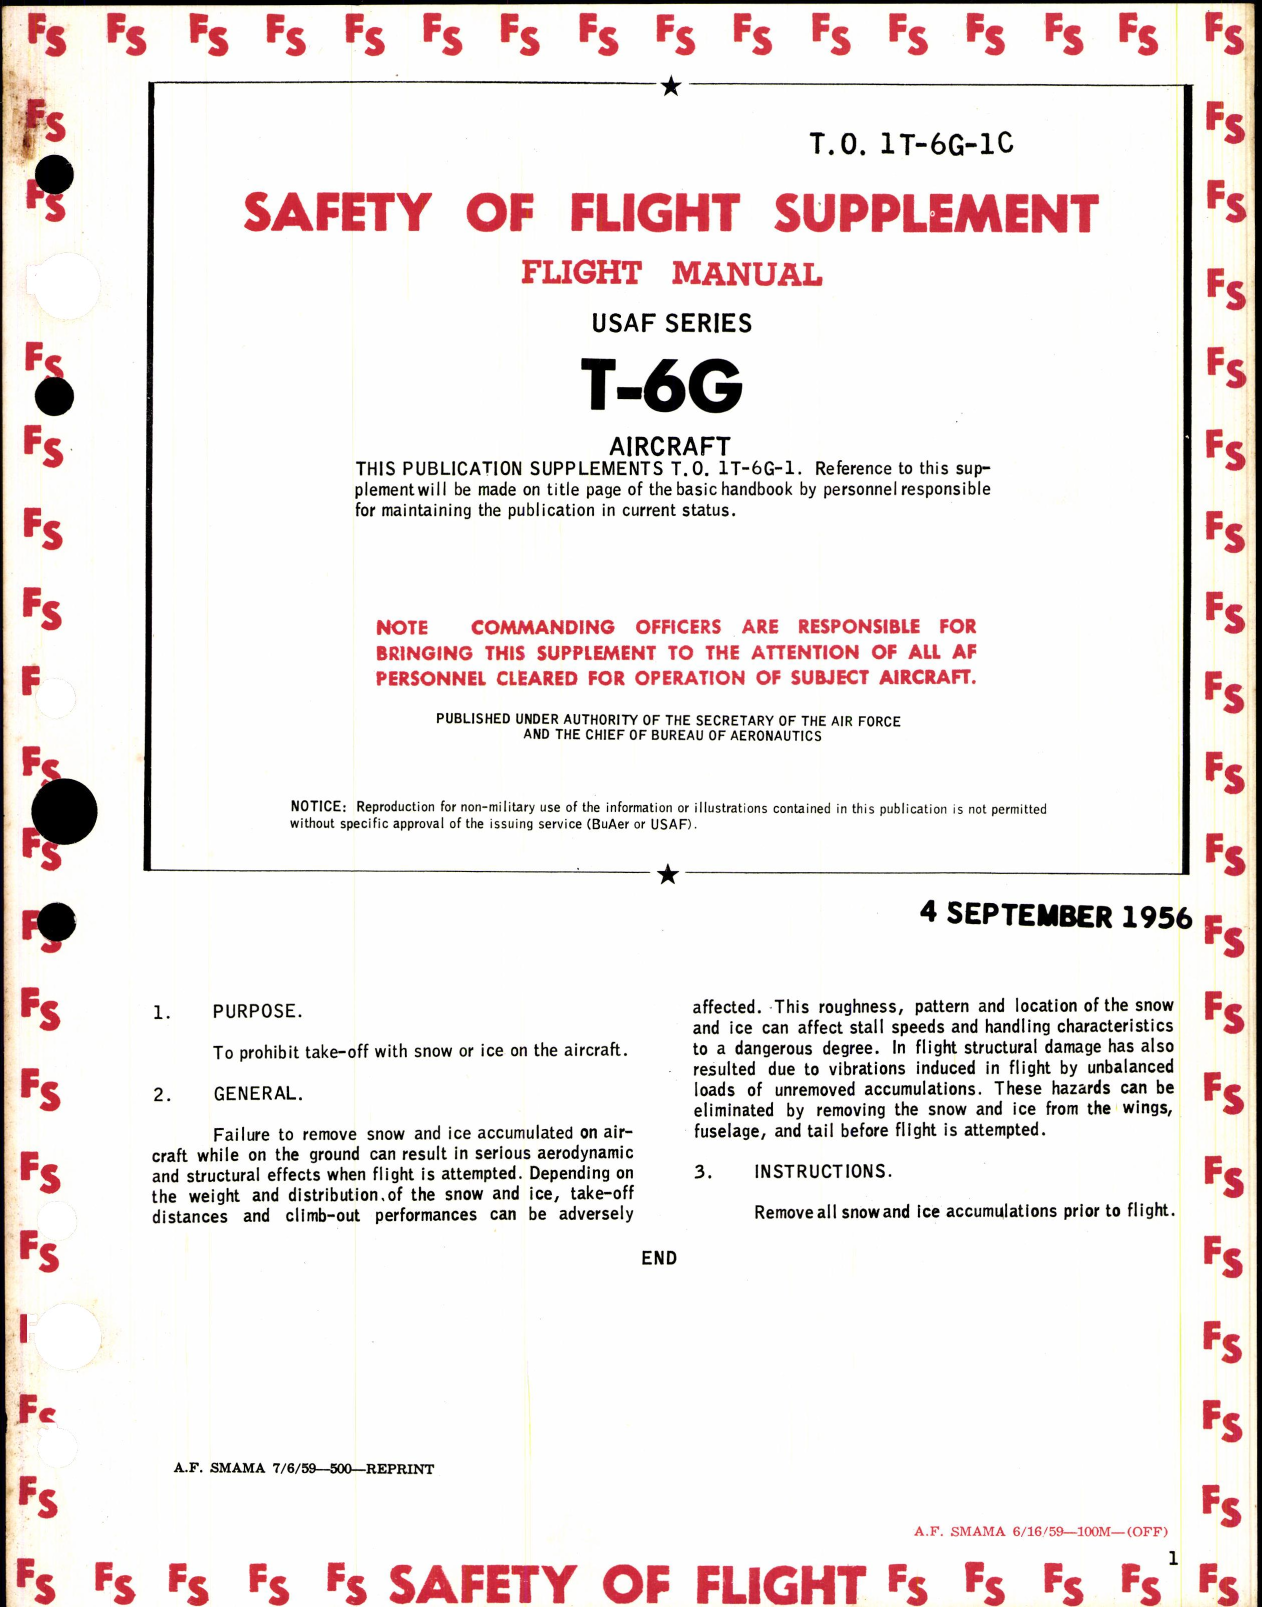 Sample page 1 from AirCorps Library document: Safety of Flight Supplement Flight Manual for T-6G Aircraft